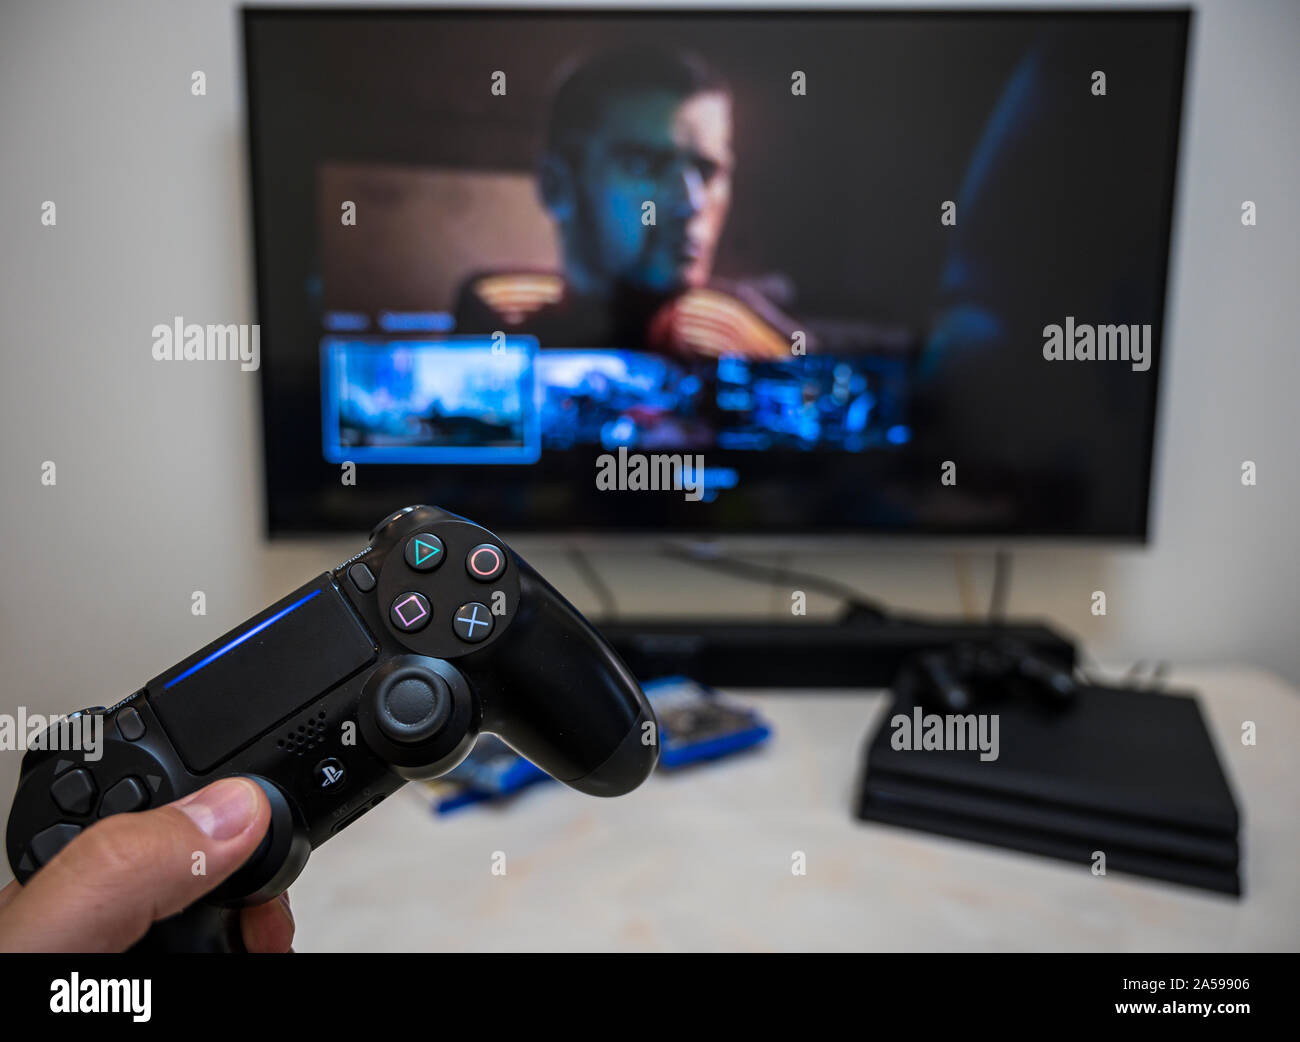 Pre-order, download, play Sony Play Station 4 Pro game Cyberpunk 2077 on  the big LCD screen at home. Controller in the hand Stock Photo - Alamy